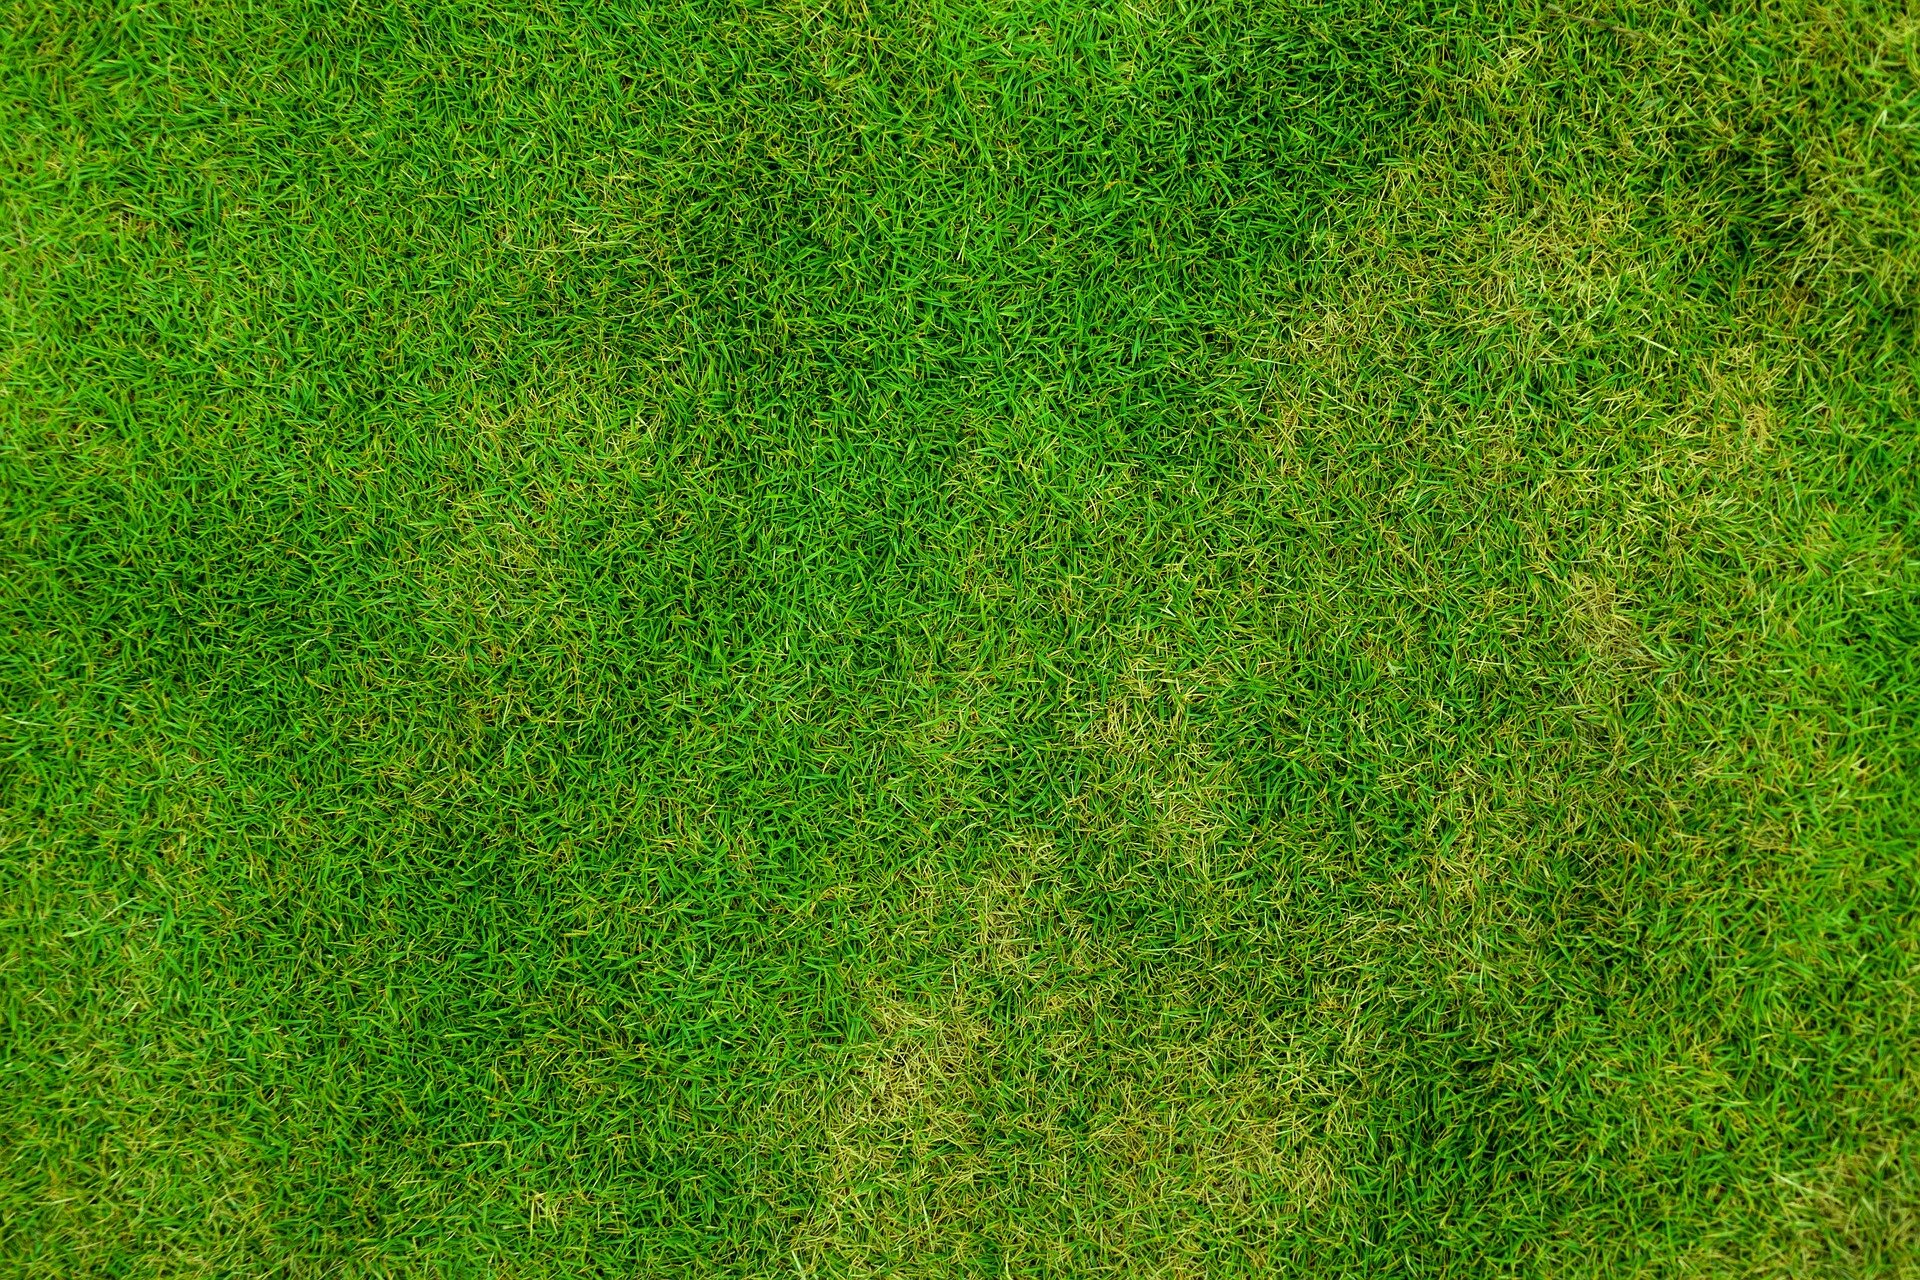 A close up of a lawn with areas of yellowing that could lead to patchy grass.